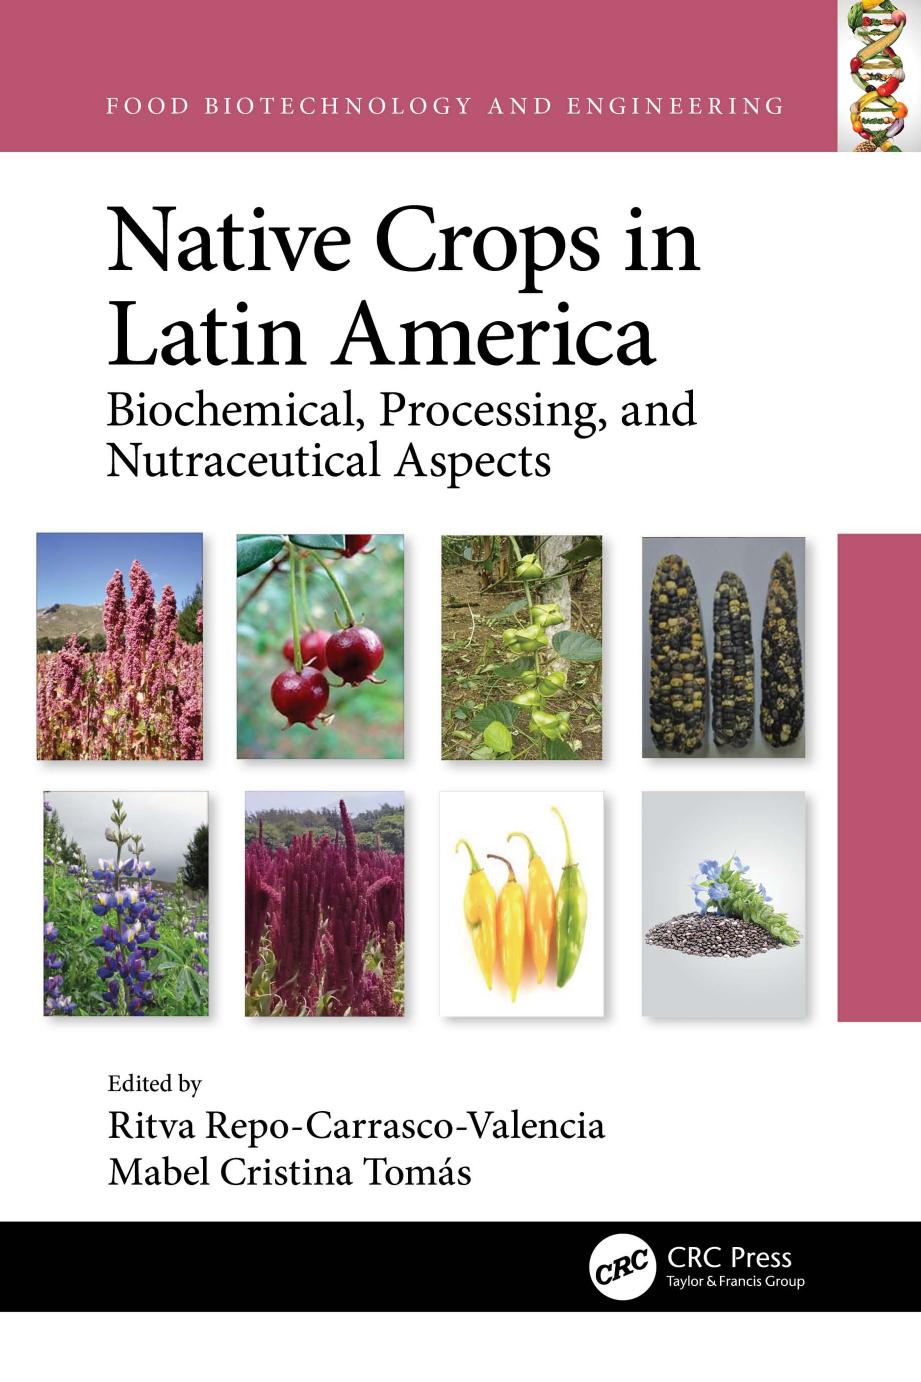 Native Crops in Latin America; Biochemical, Processing, and Nutraceutical Aspects